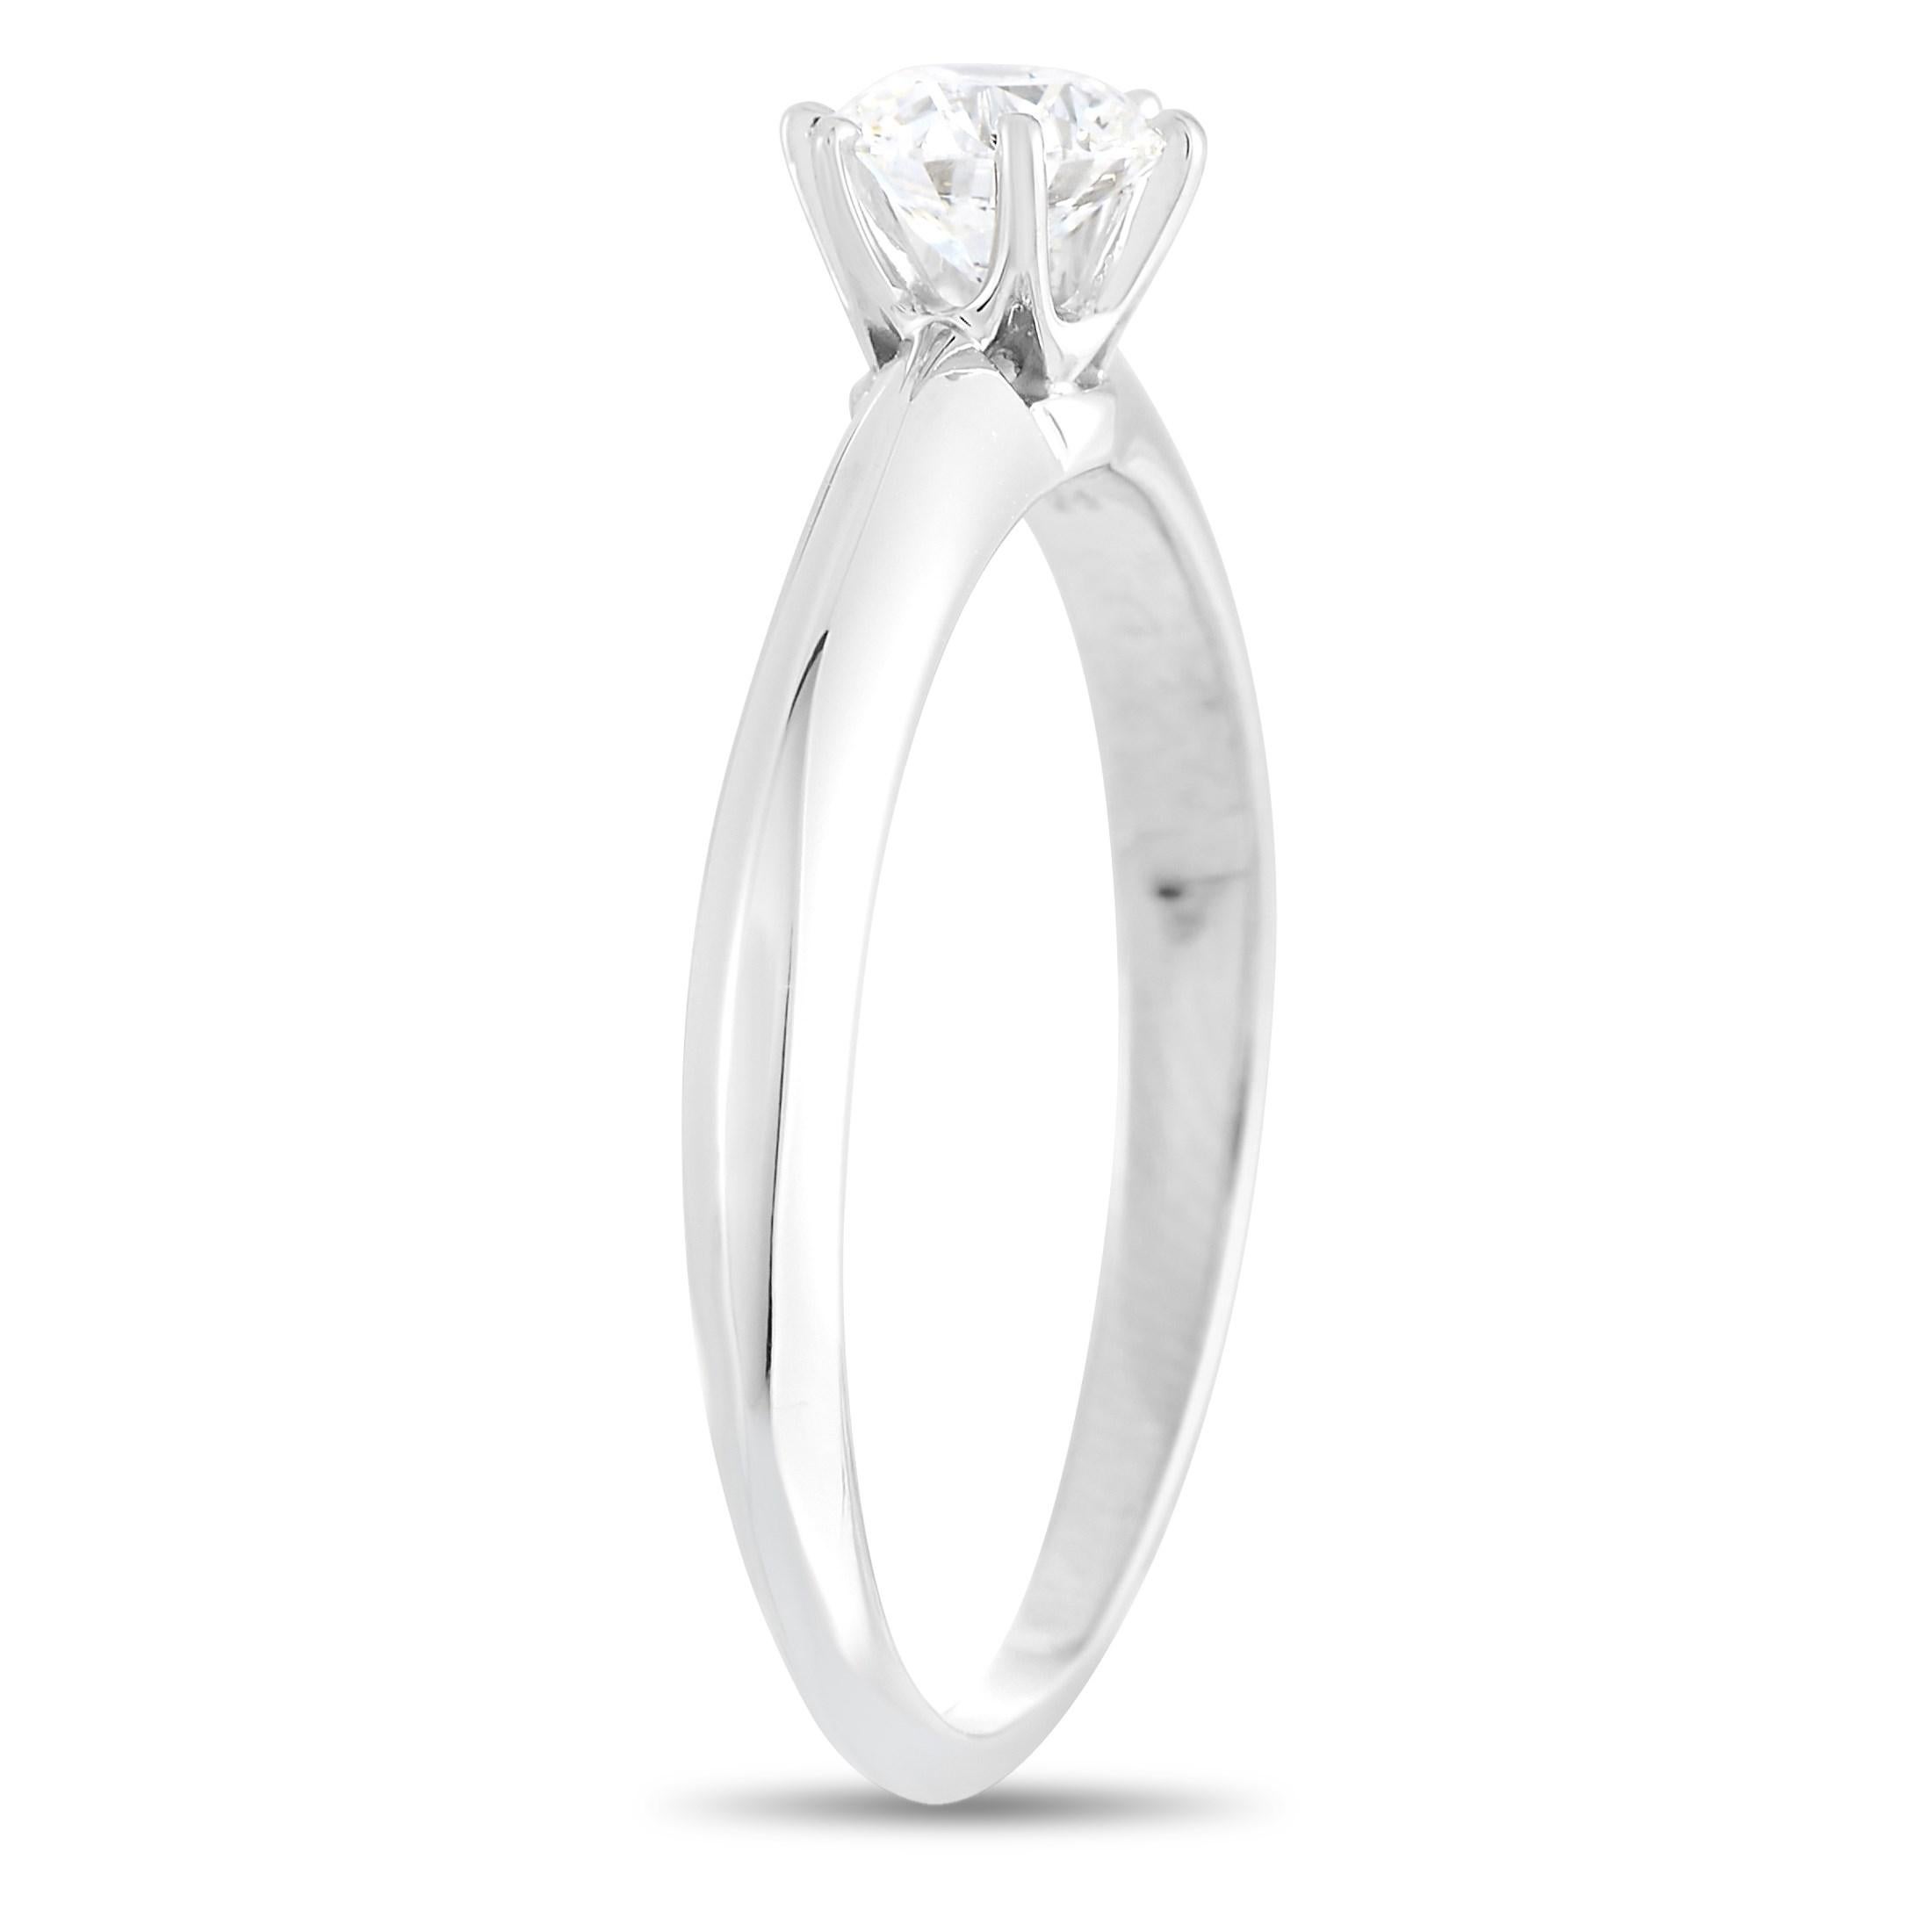 The Tiffany & Co. Platinum 0.41 ct Diamond E-VVS1 Engagement Ring is characterized by one round brilliant diamond perched on a six-prong setting on a simple 2mm band with knife-edge detail. Simple but significant, this design has set the standard